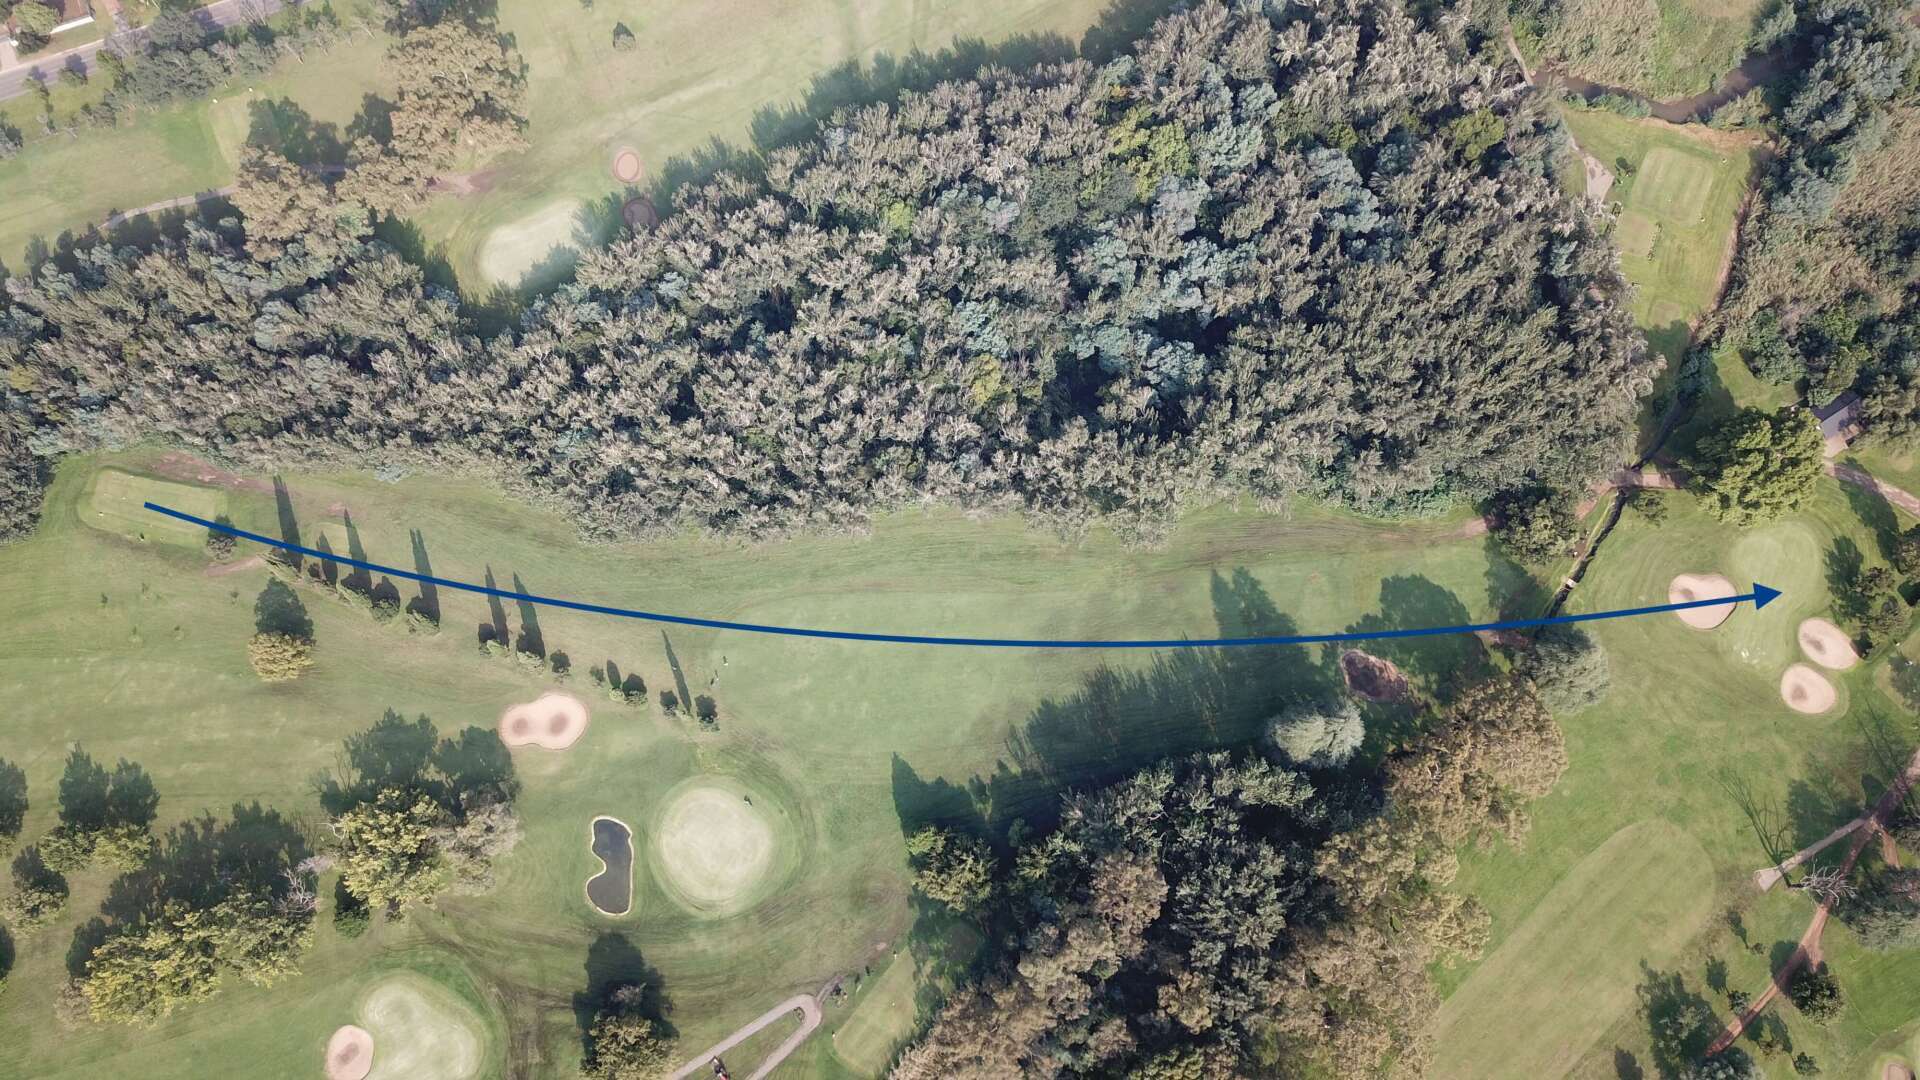 Hole 9 of the course